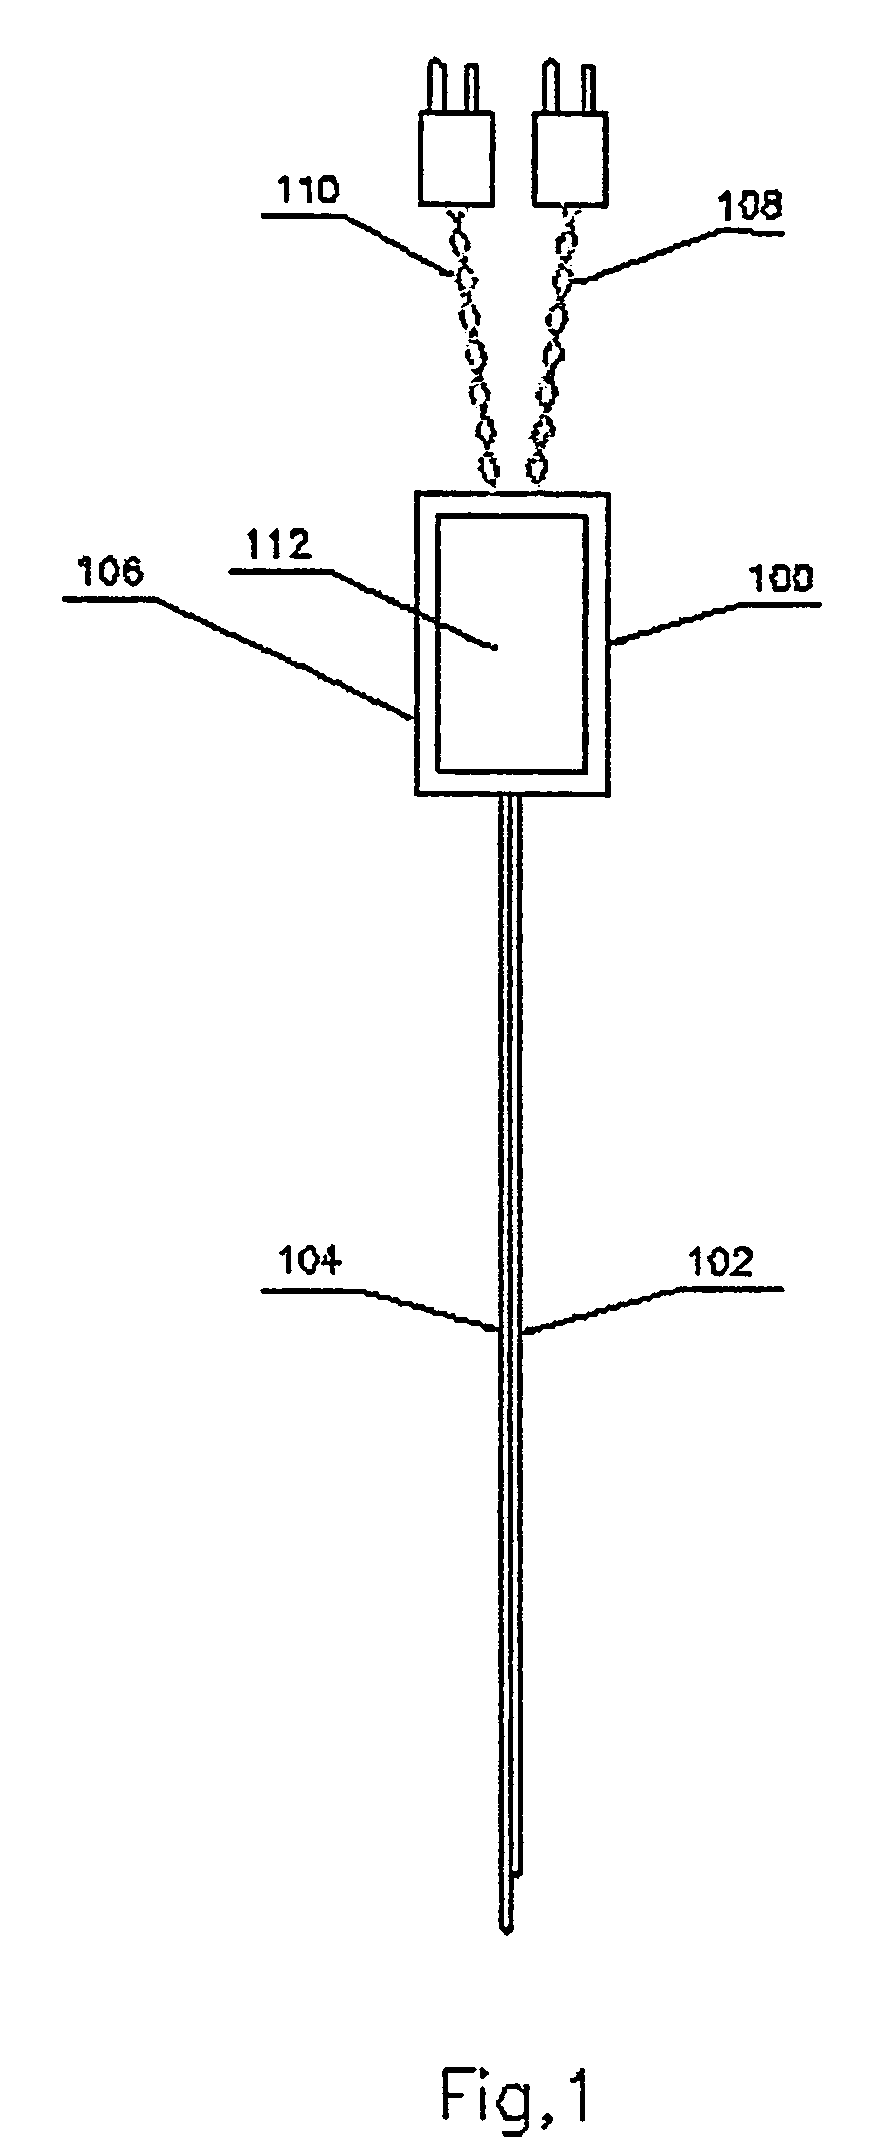 Method and a device for thermal analysis of cast iron